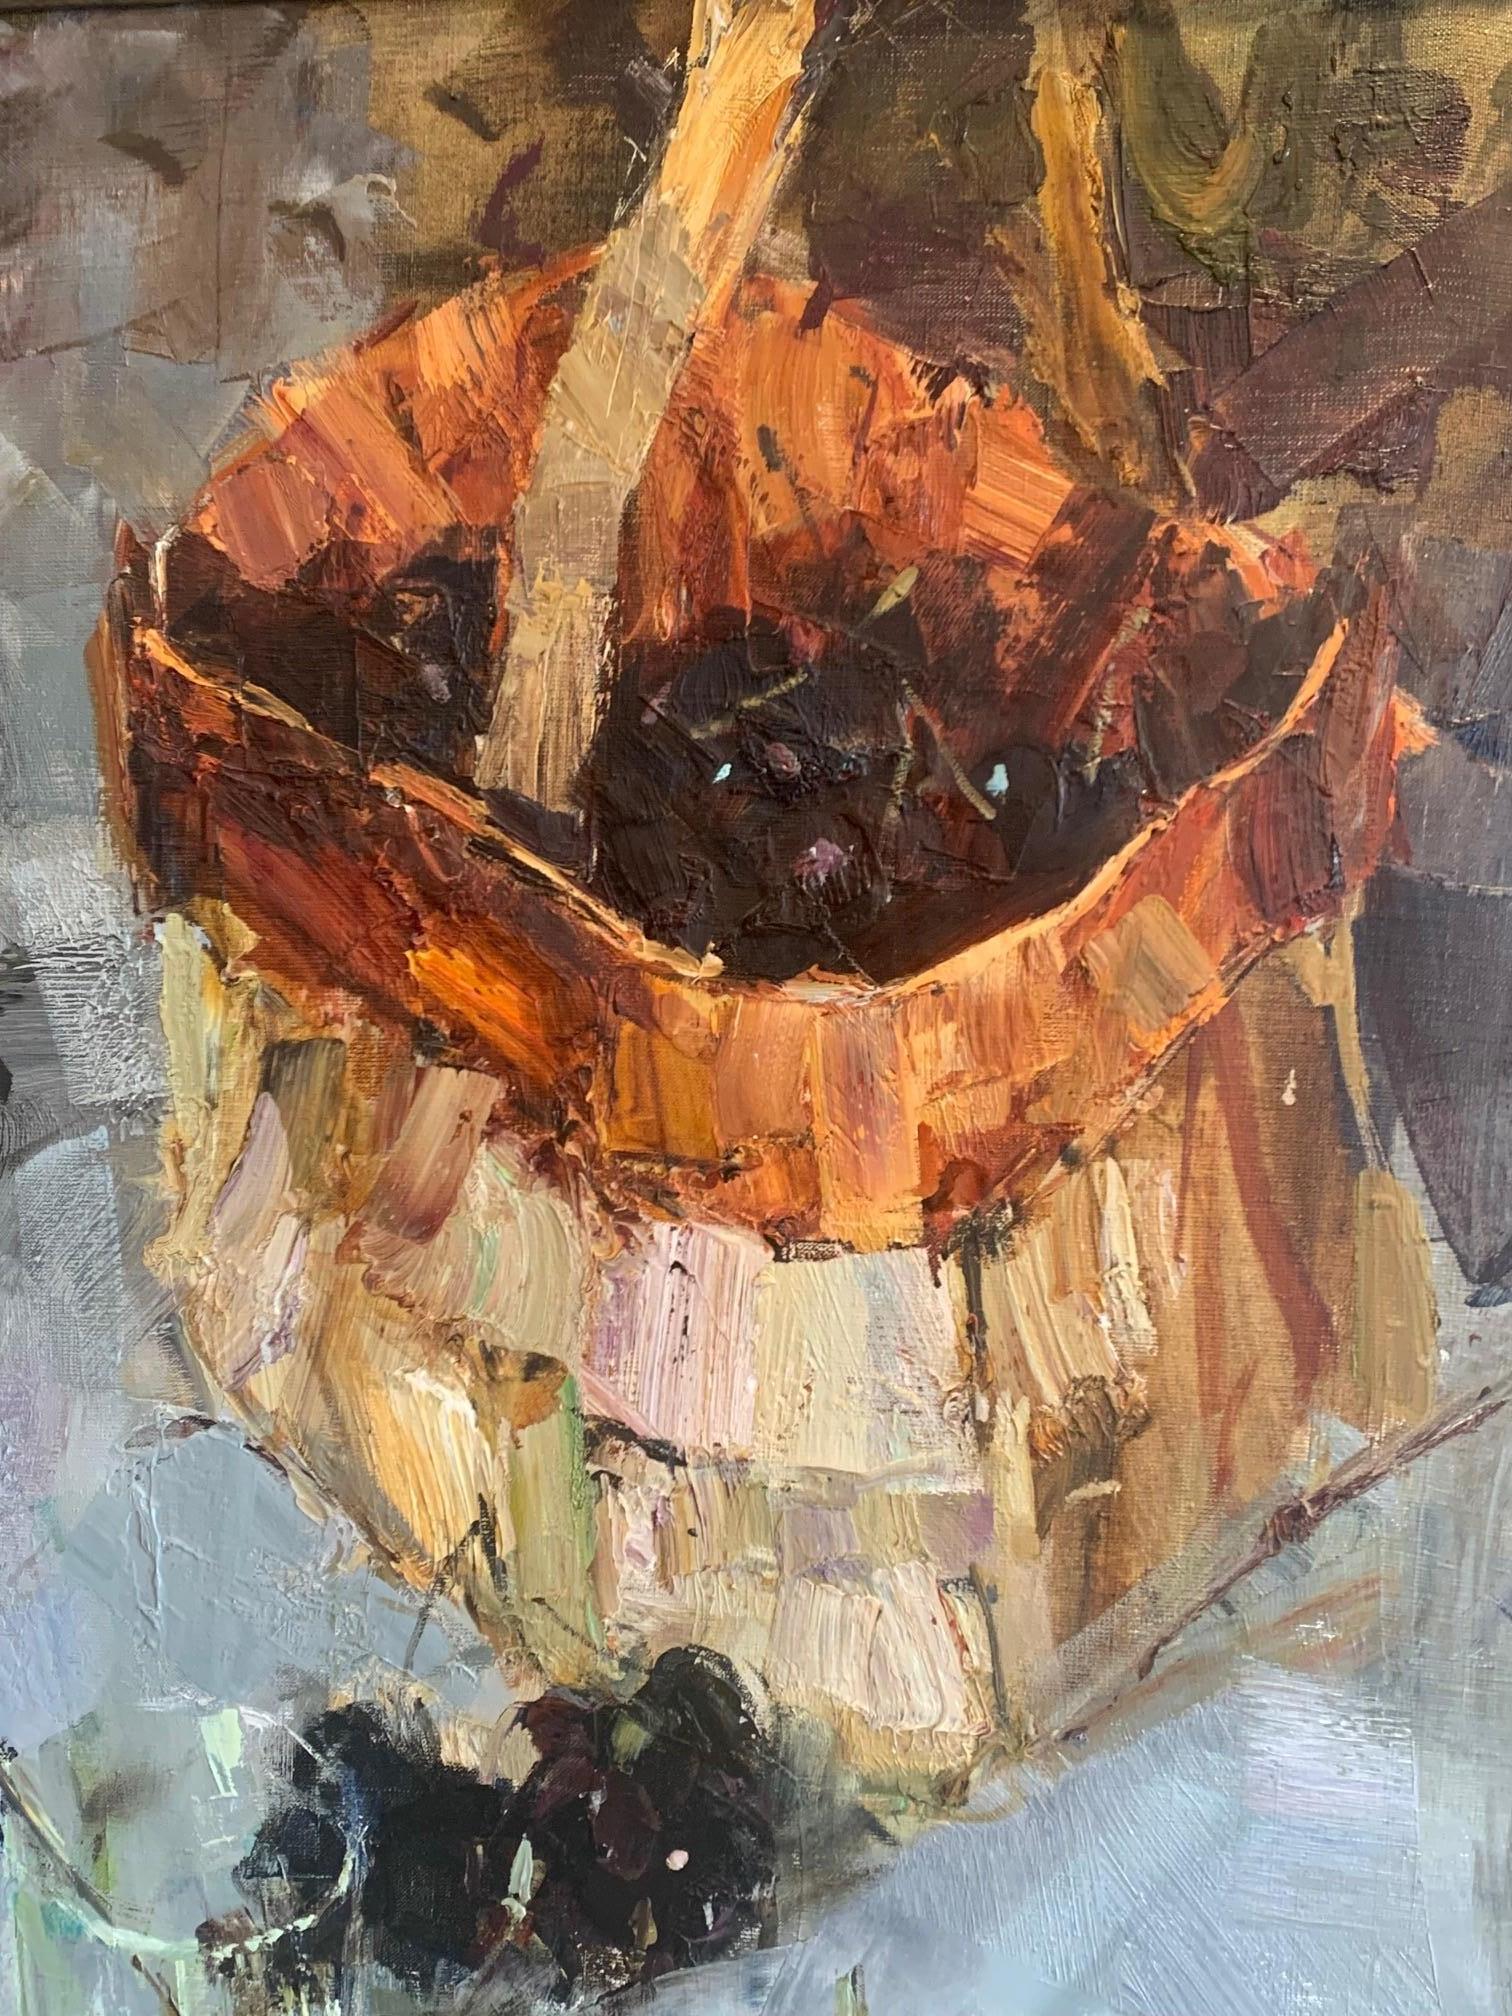 Black Cherries and a Basket - Impressionist Painting by Andrei Selenin